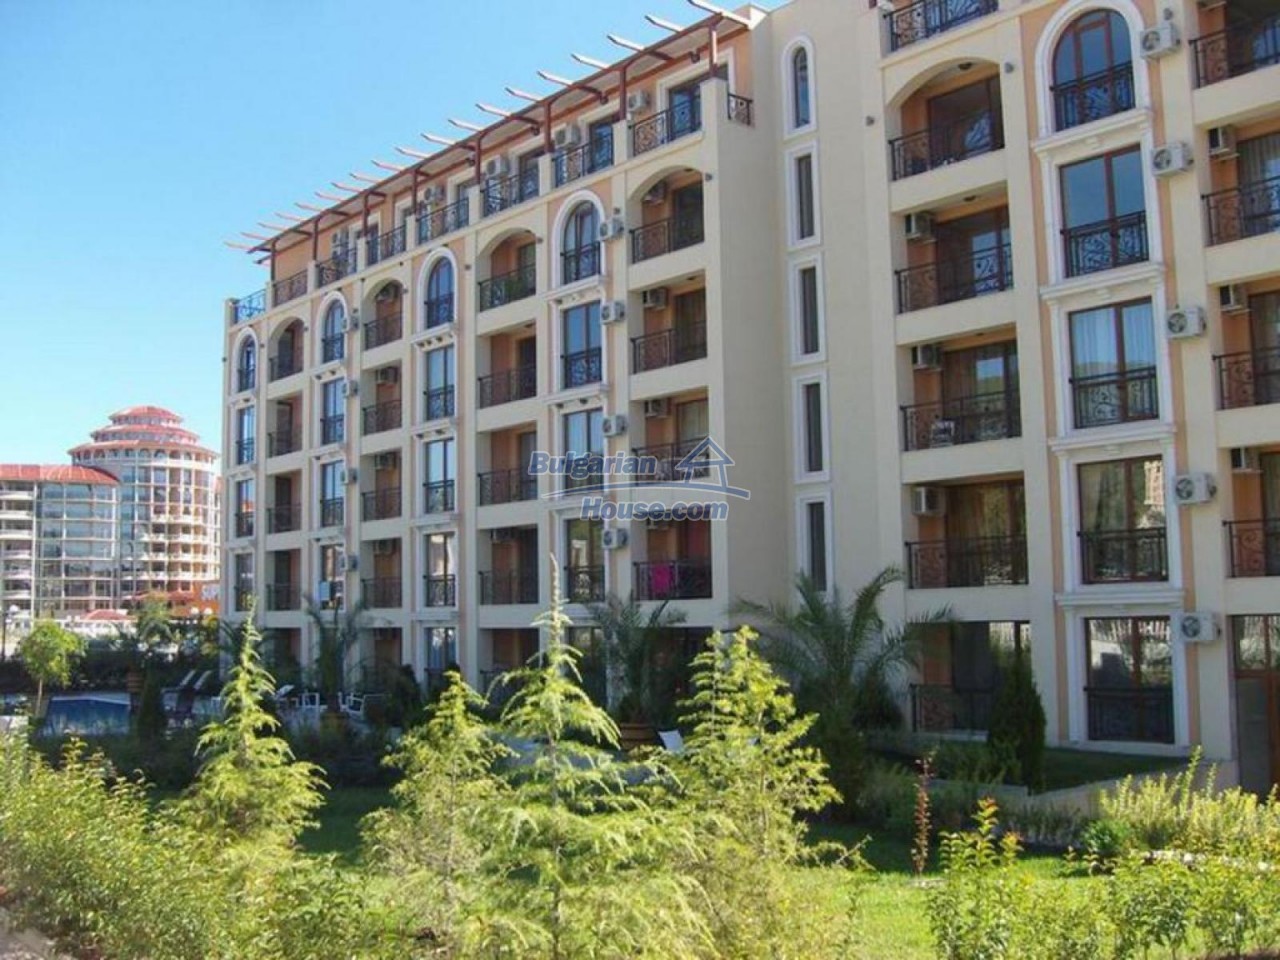 13751:5 - Studio apartment for sale  in Elenite 200 meters from the sea 